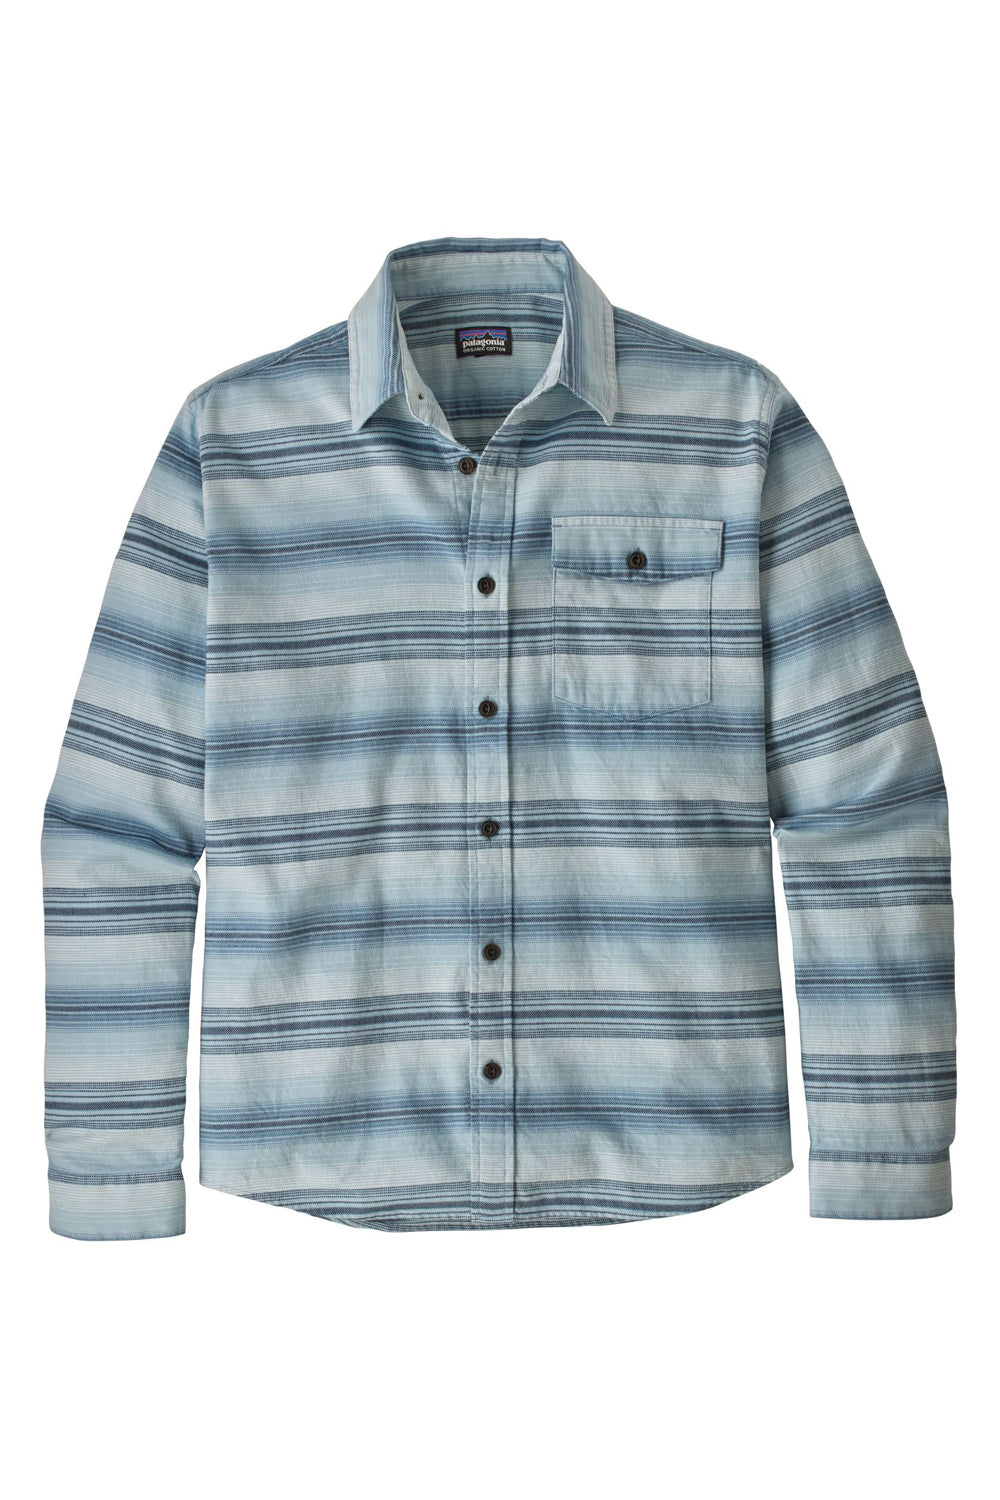 Patagonia Men's Light Weight FJord Flannel Shirt